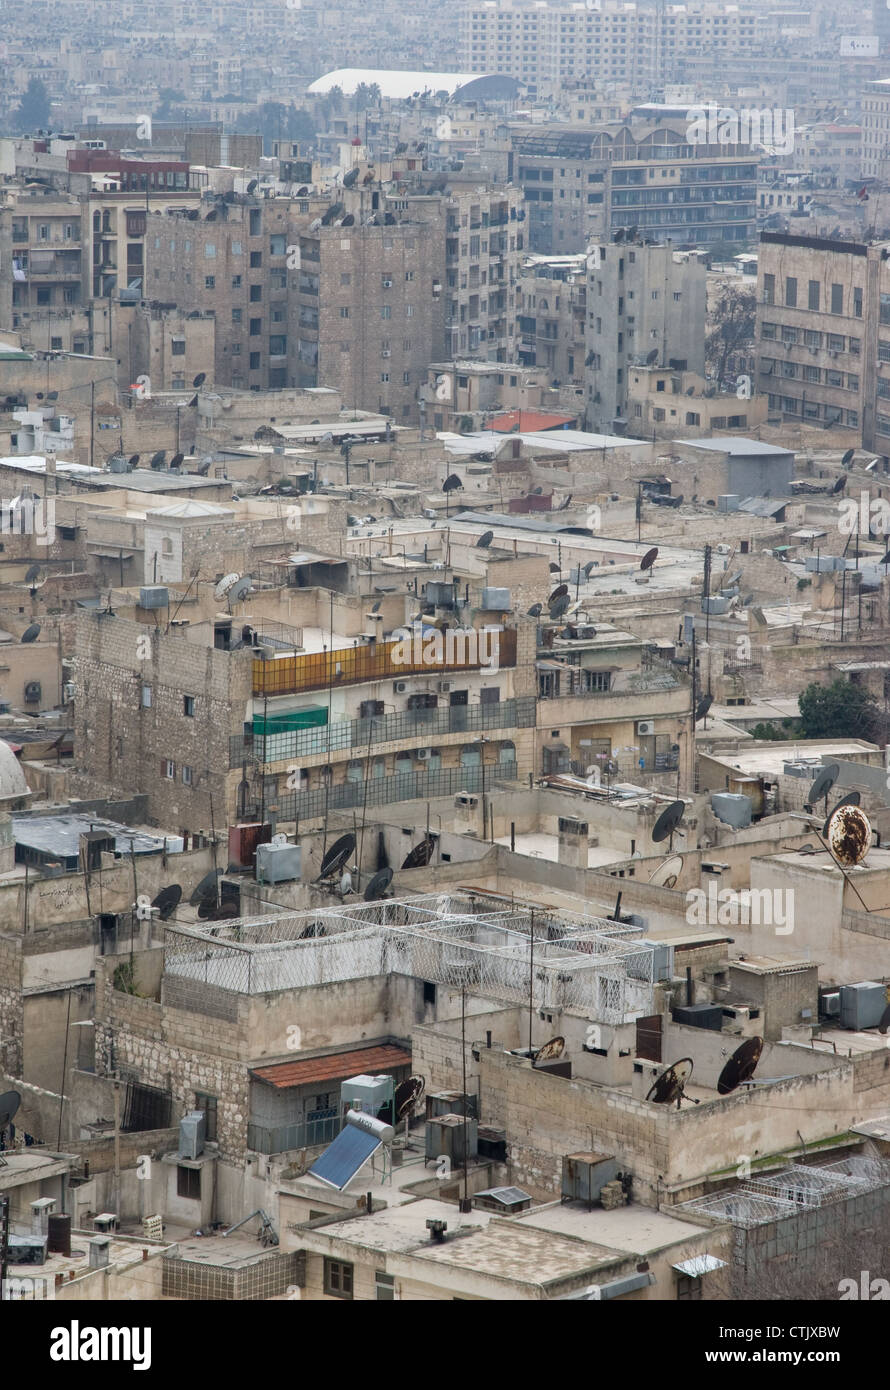 View of houses in the city of Aleppo, in Syria, from the Citadel Stock Photo